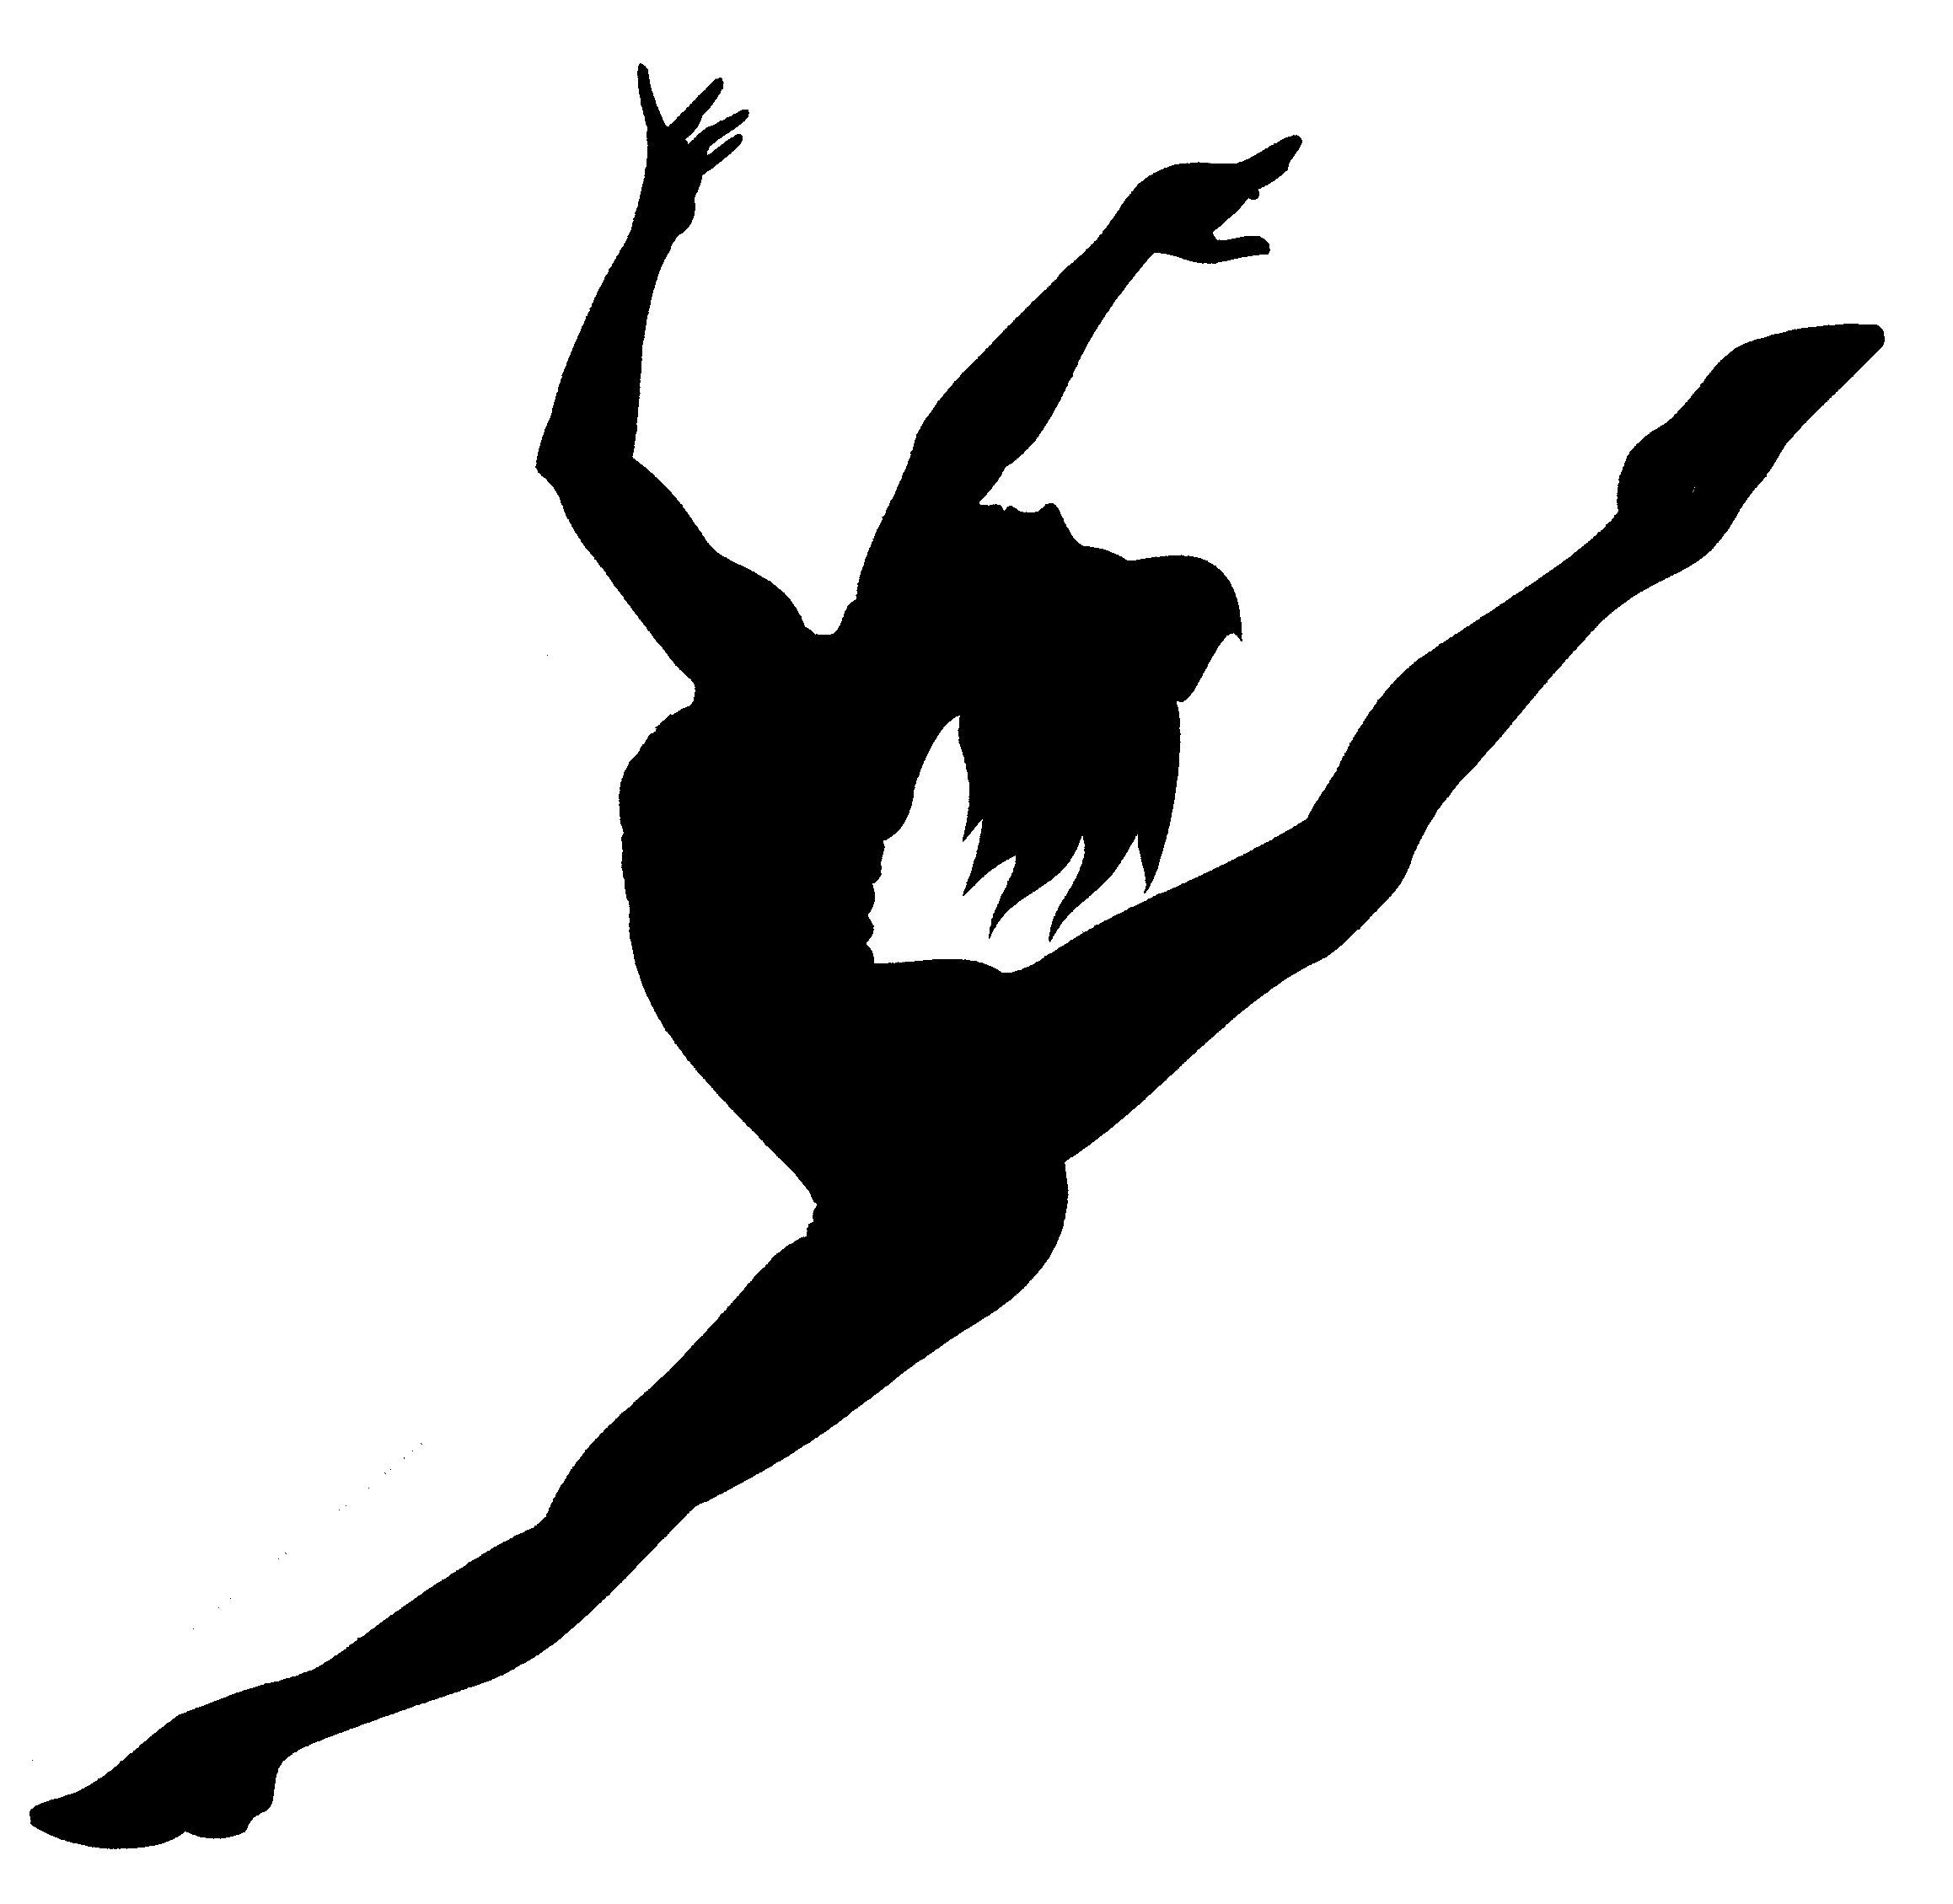 Jazz Dancer Clipart Silhouette - Free Clipart Images